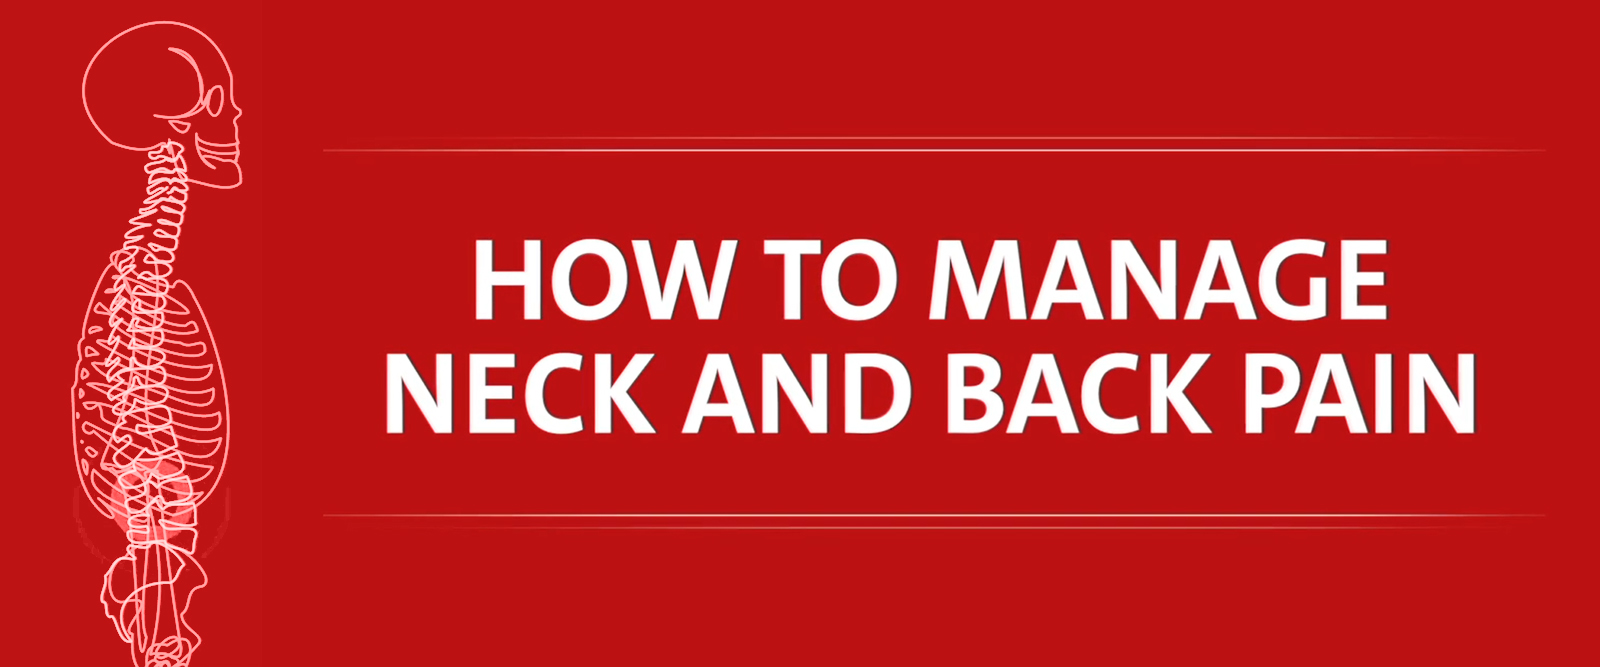 HOW TO MANAGE NECK AND BACK PAIN banner